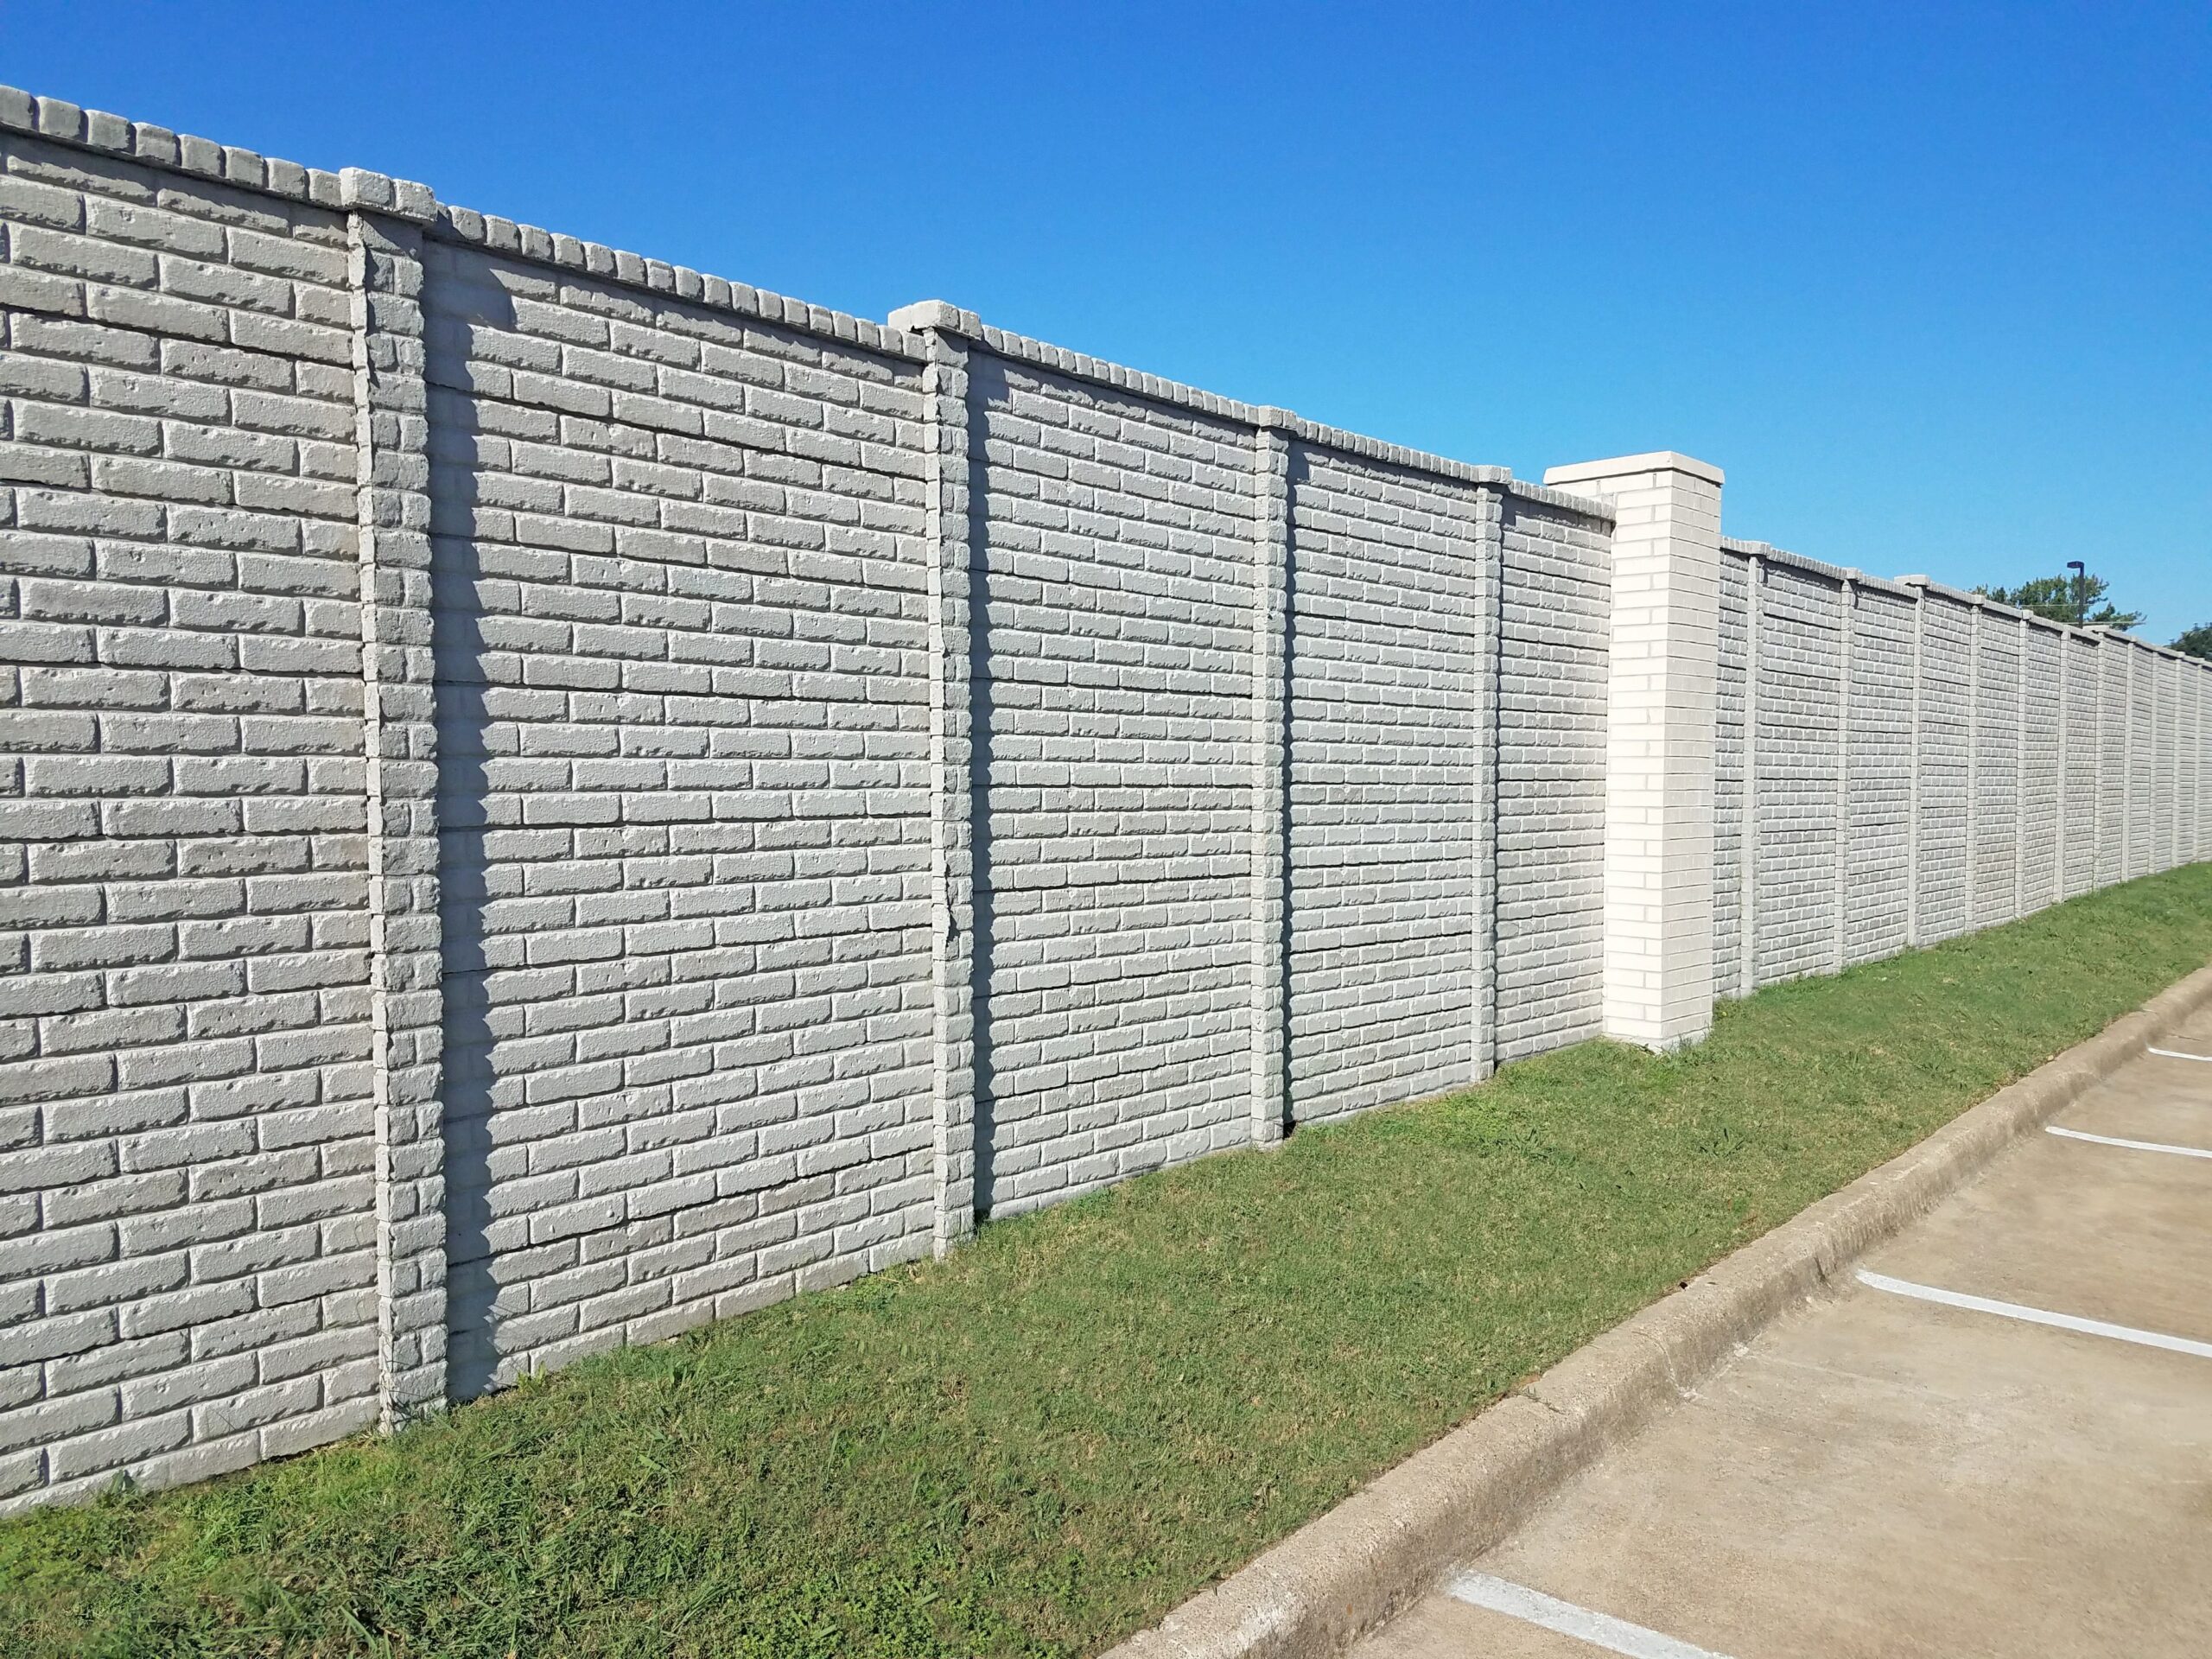 118. The Pros and Cons of Concrete Fences